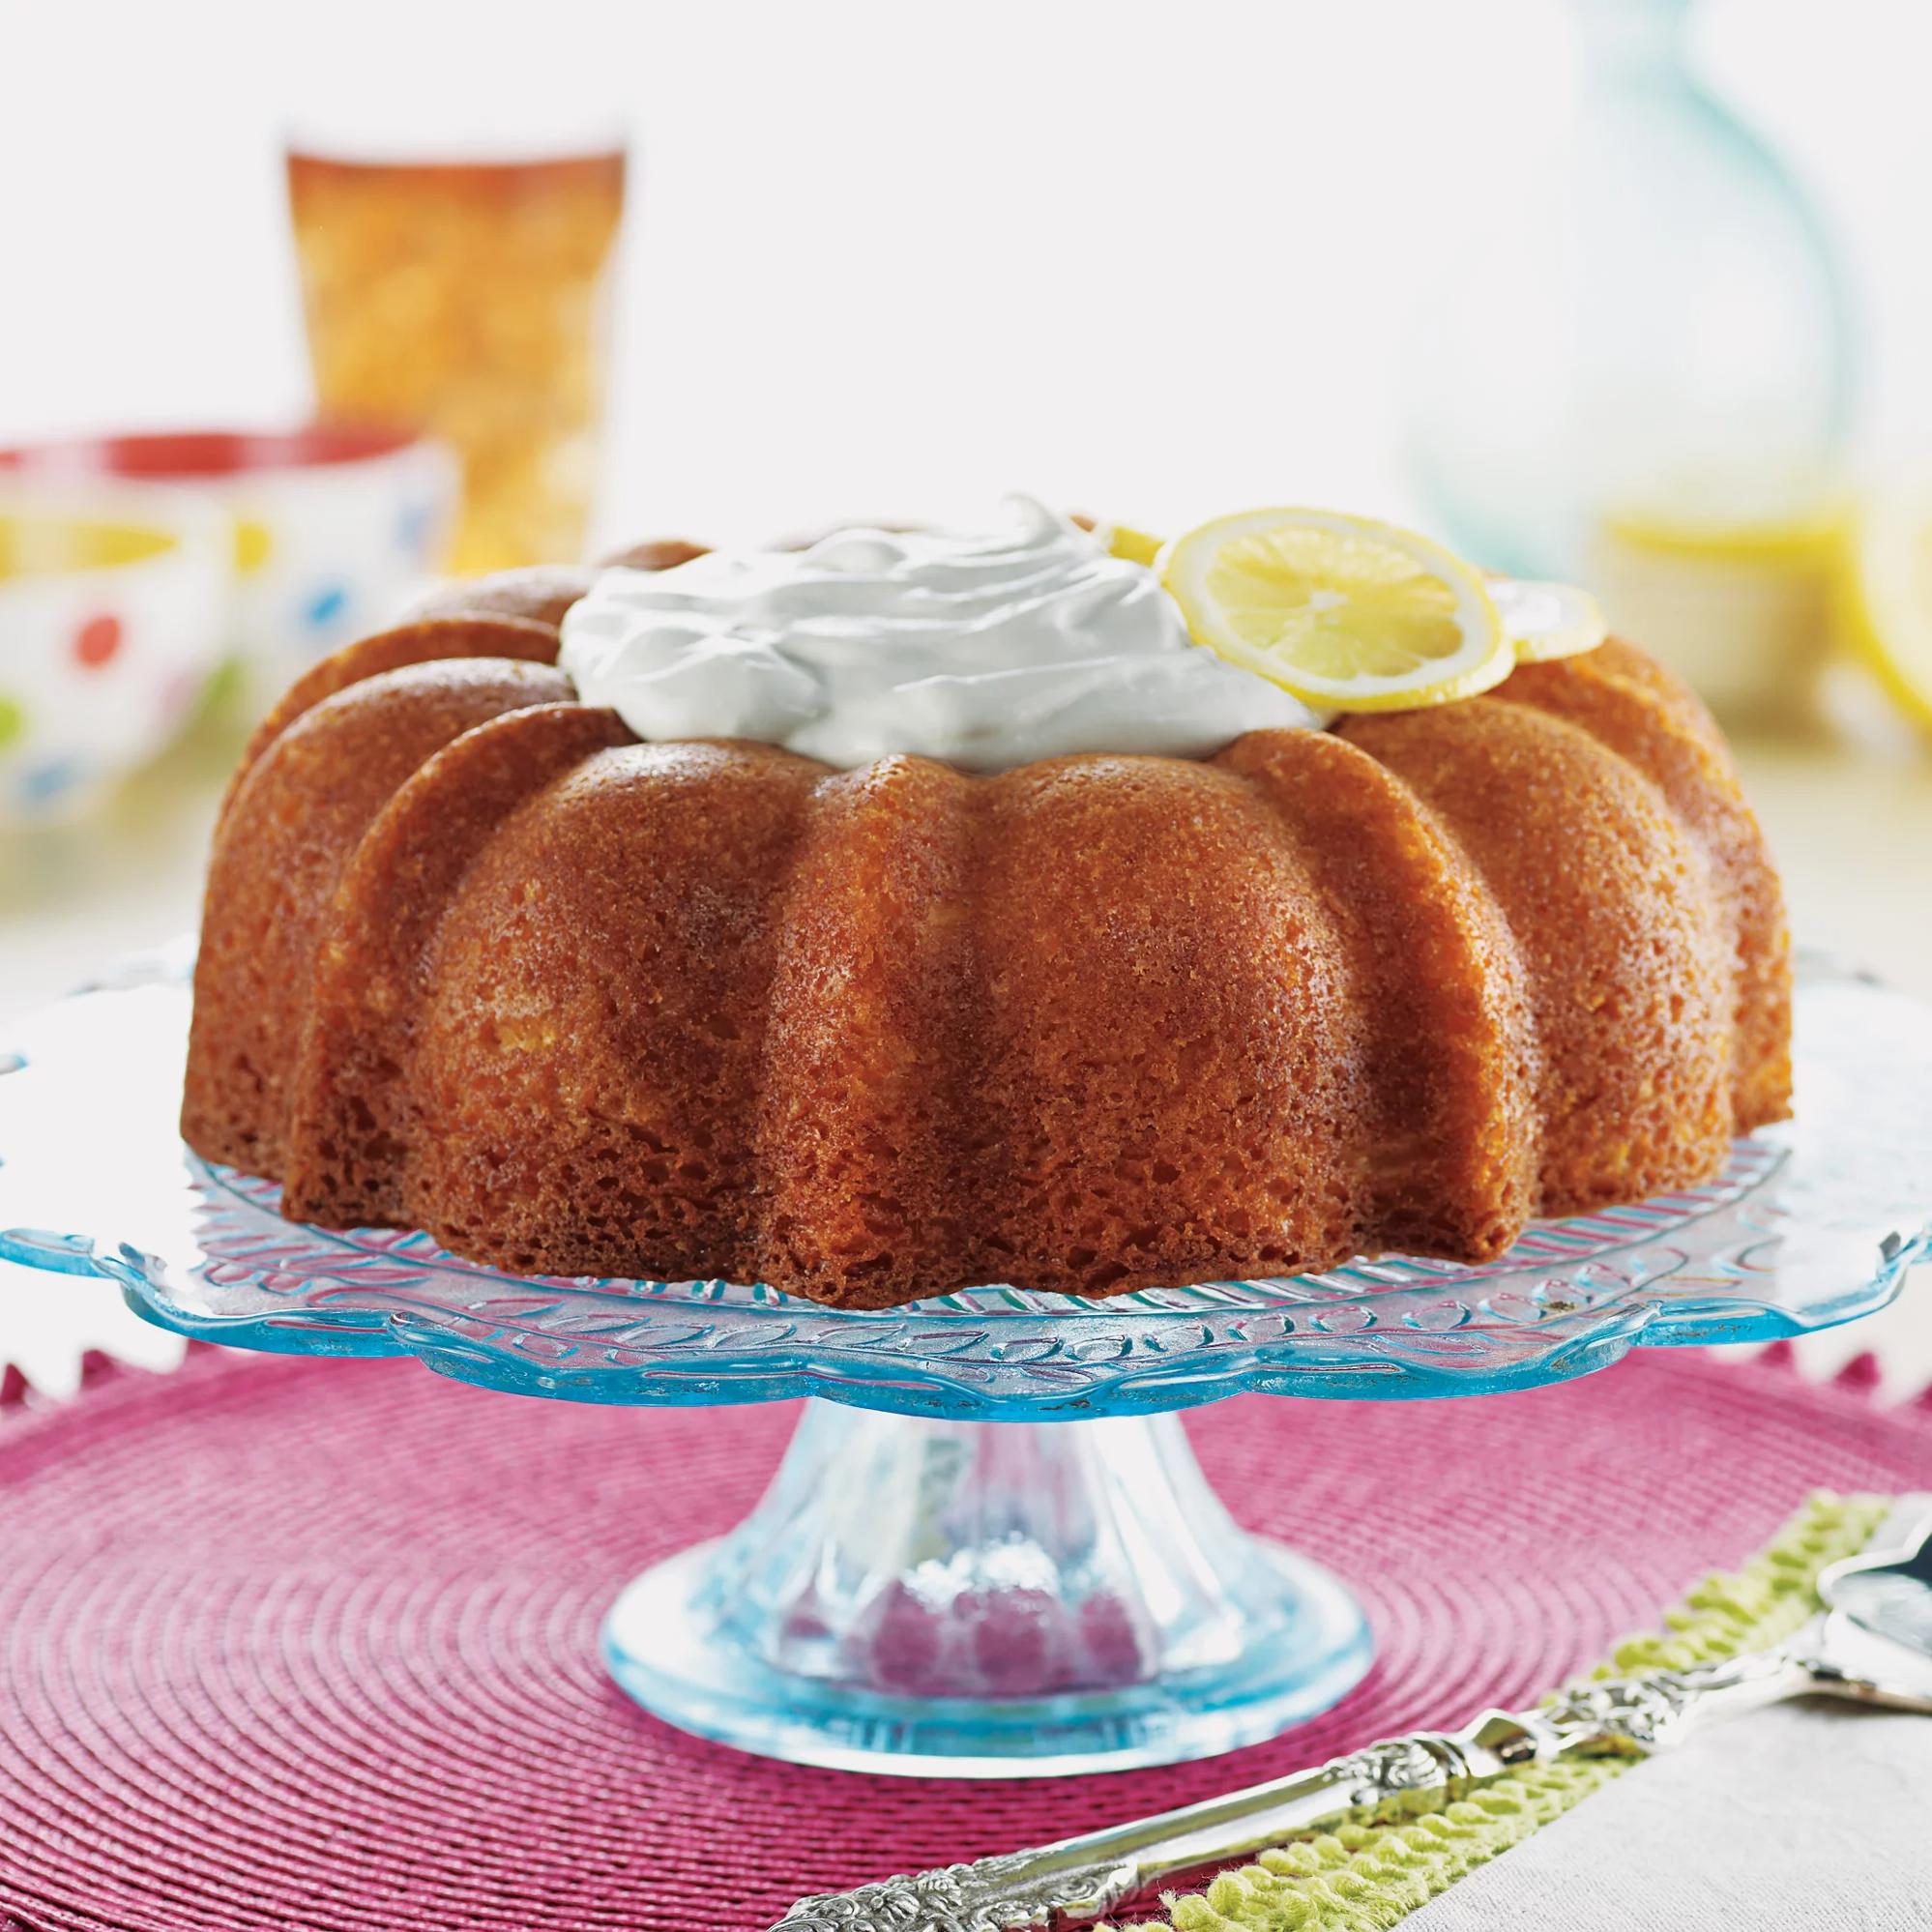  Fluffy, buttery, heavenly pound cake with a twist